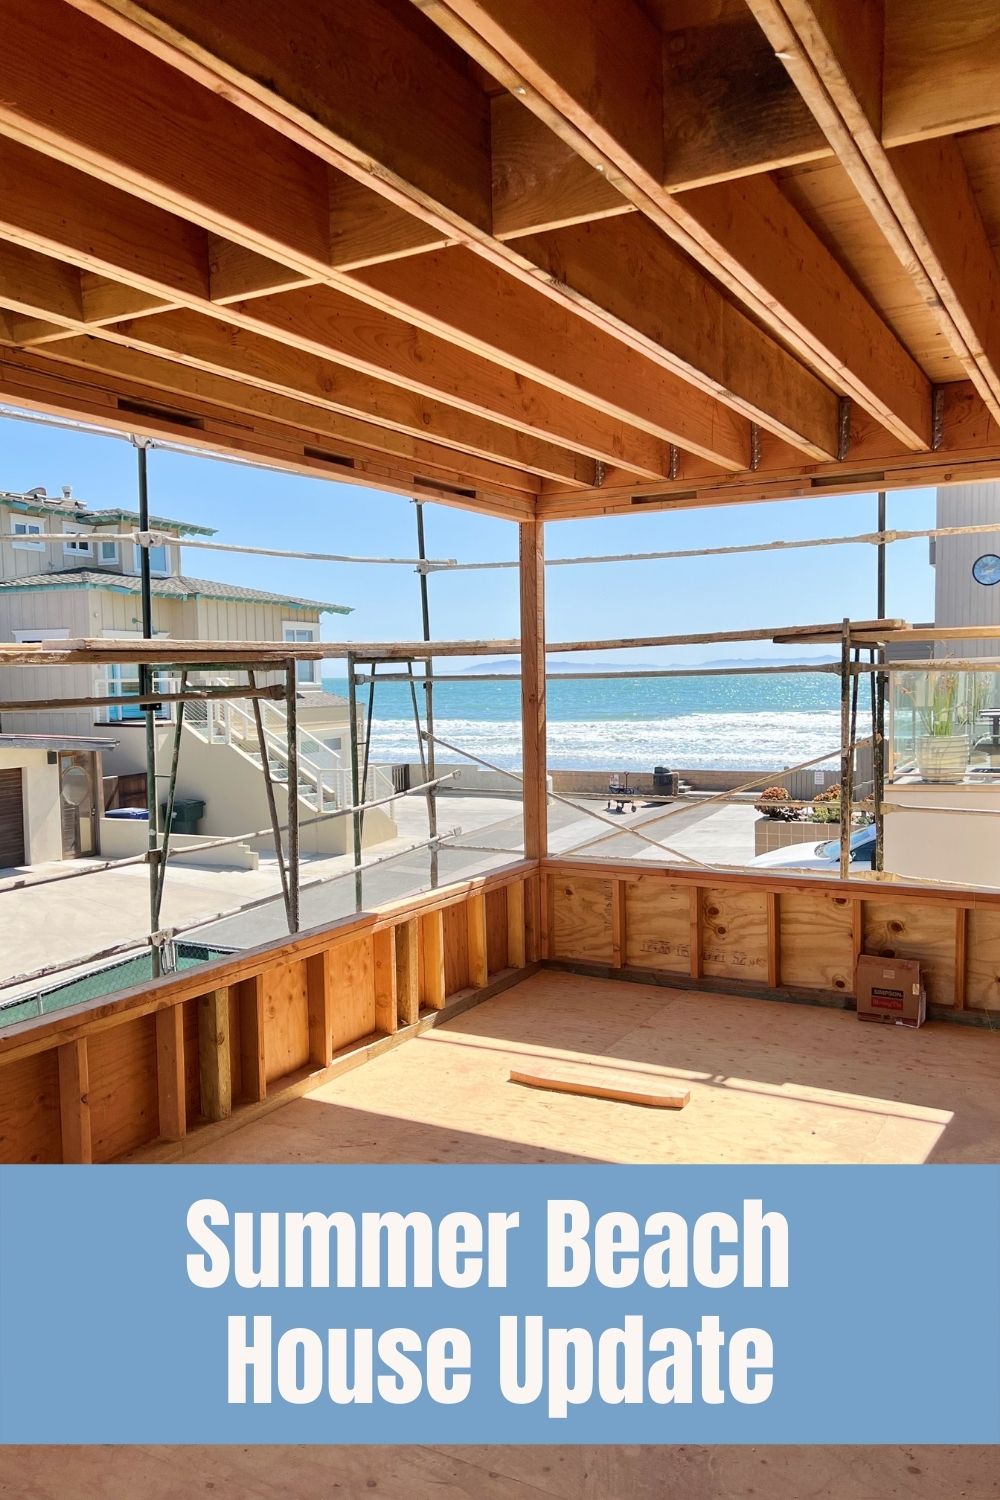 It is supposed to be 96 degrees here today, so I am calling this post my Summer Beach House update. I hope you like it!